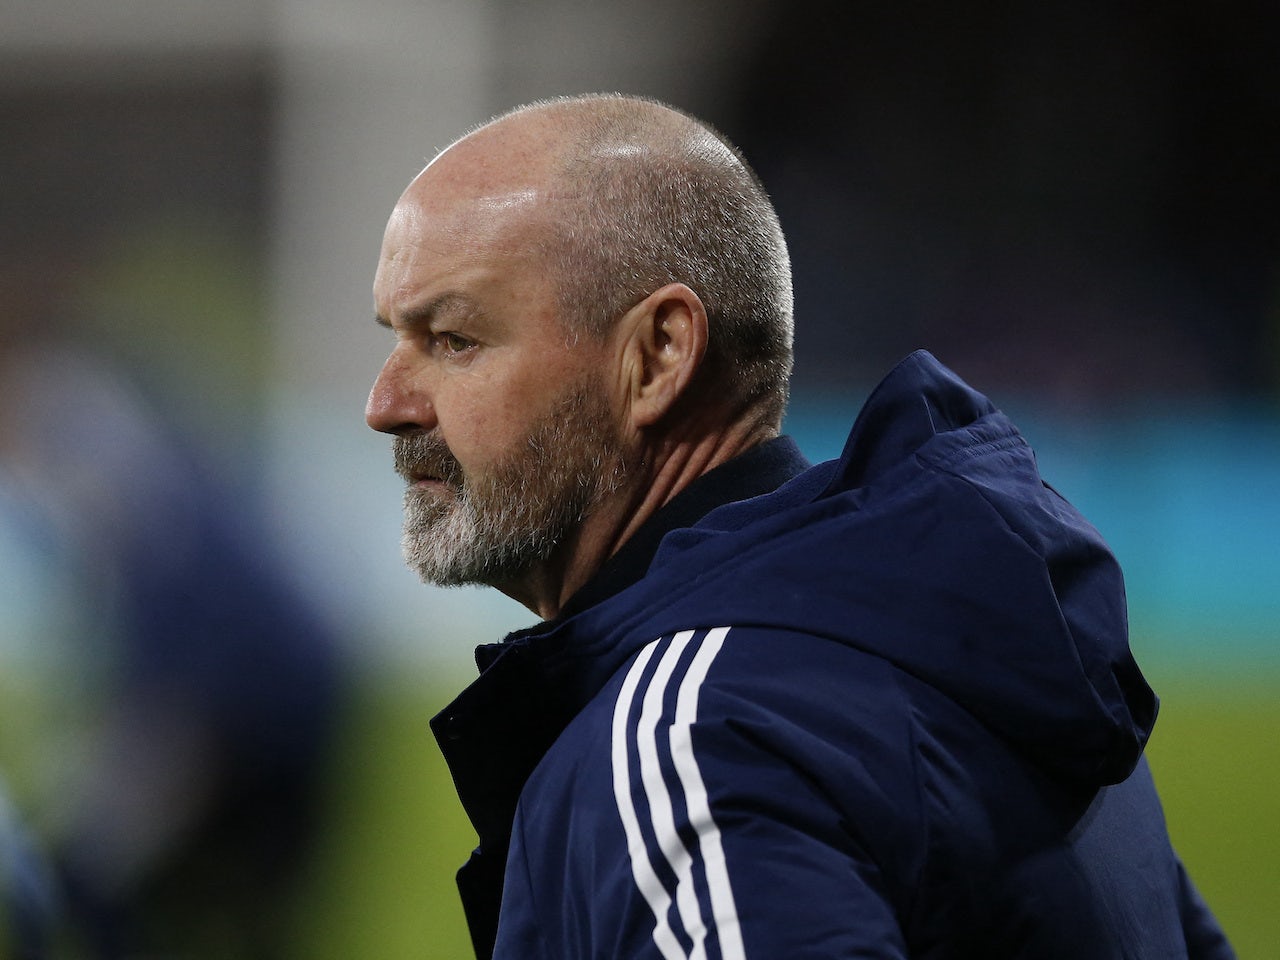 Scotland name Euro 2024 preliminary squad - Who makes the cut? Who misses out?